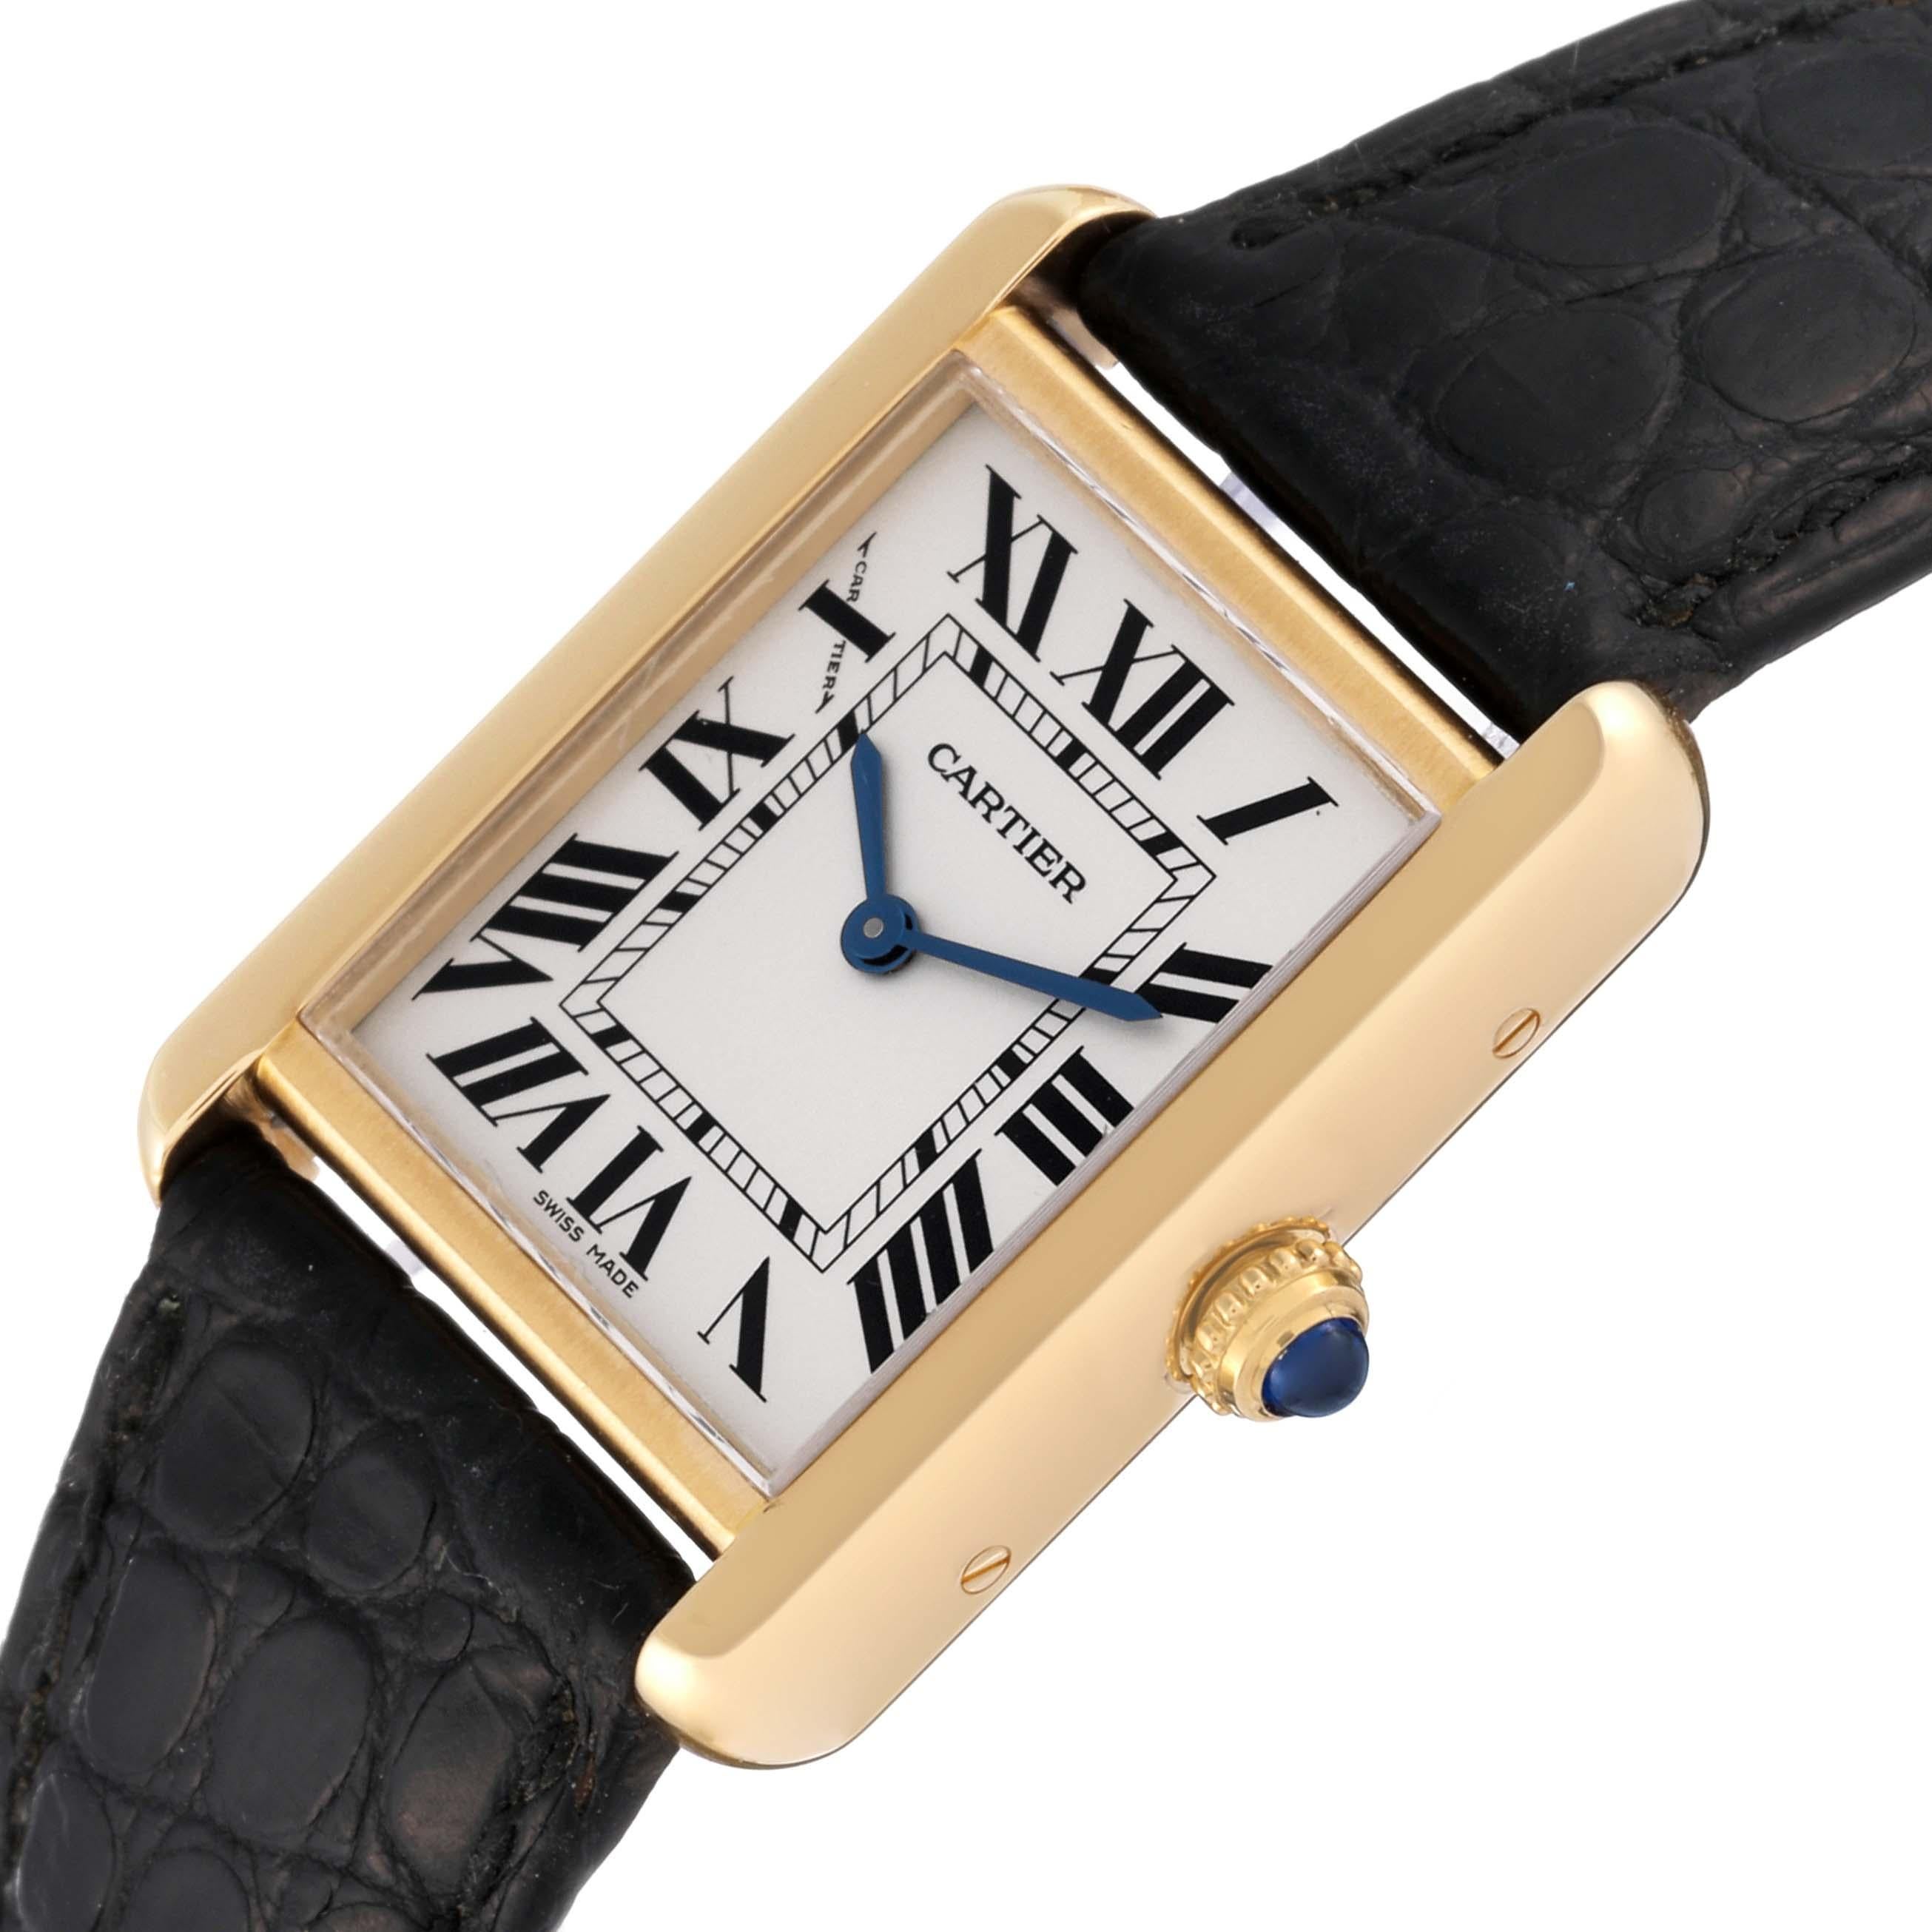 Cartier Tank Solo Yellow Gold Steel Silver Dial Ladies Watch W5200002. Quartz movement. 18k yellow gold case 30.0 x 24.4 mm. Stainless steel caseback. Circular grained crown set with blue spinel cabochon. . Scratch resistant sapphire crystal.